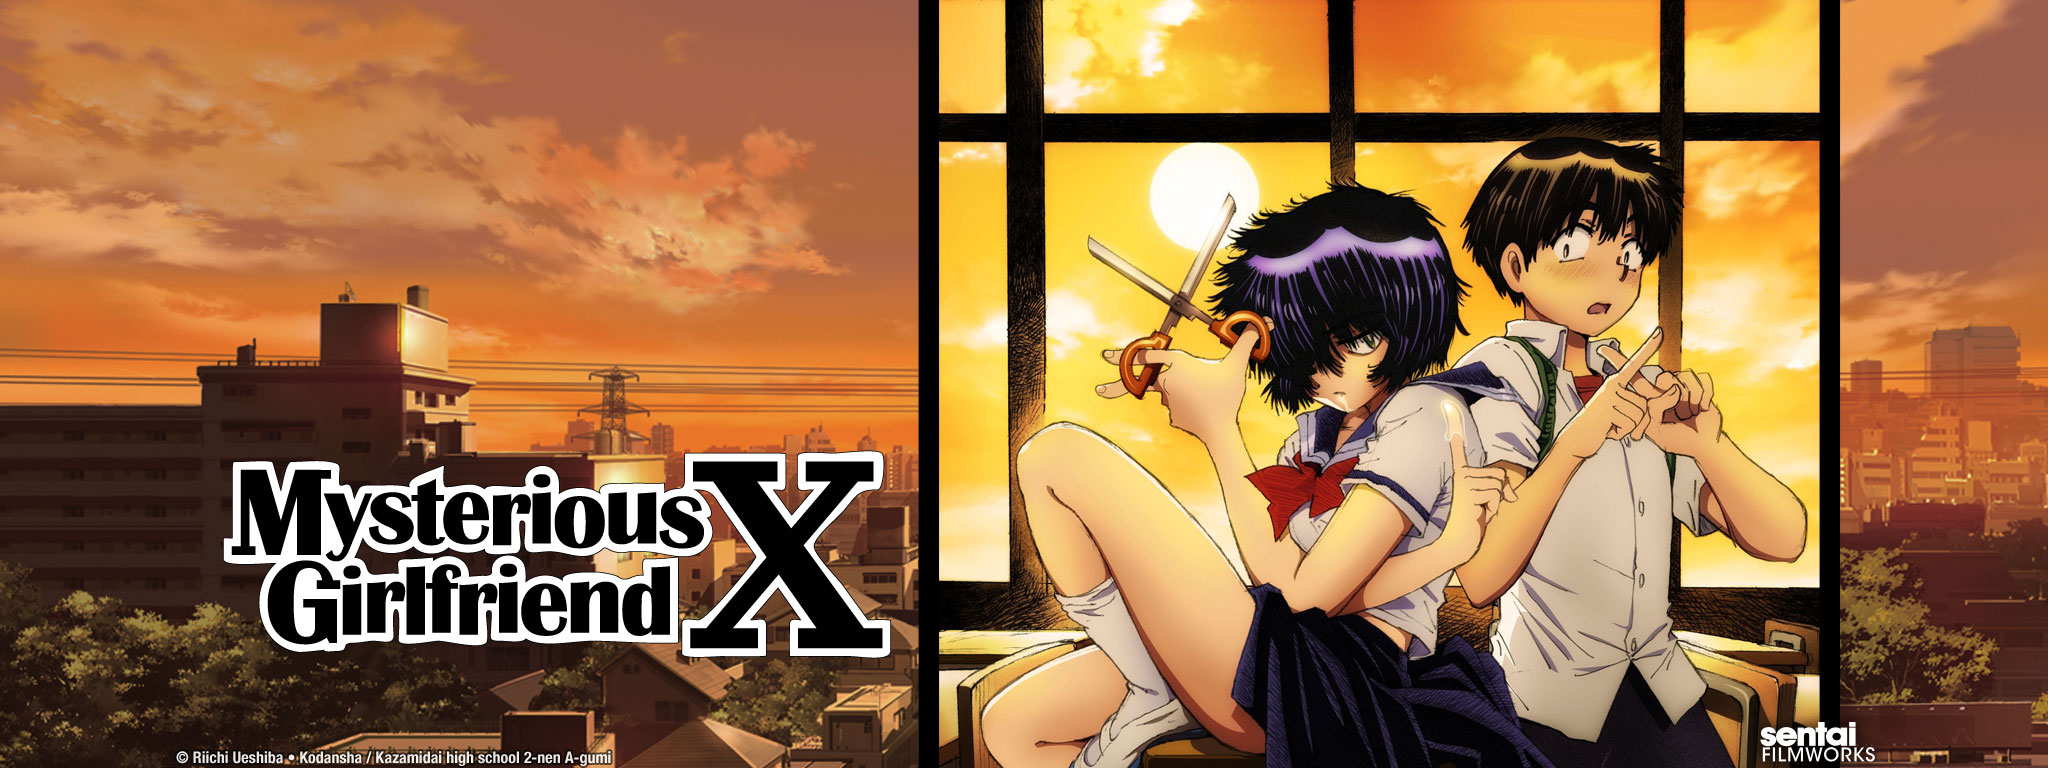 Mysterious Girlfriend X. Promotion. 